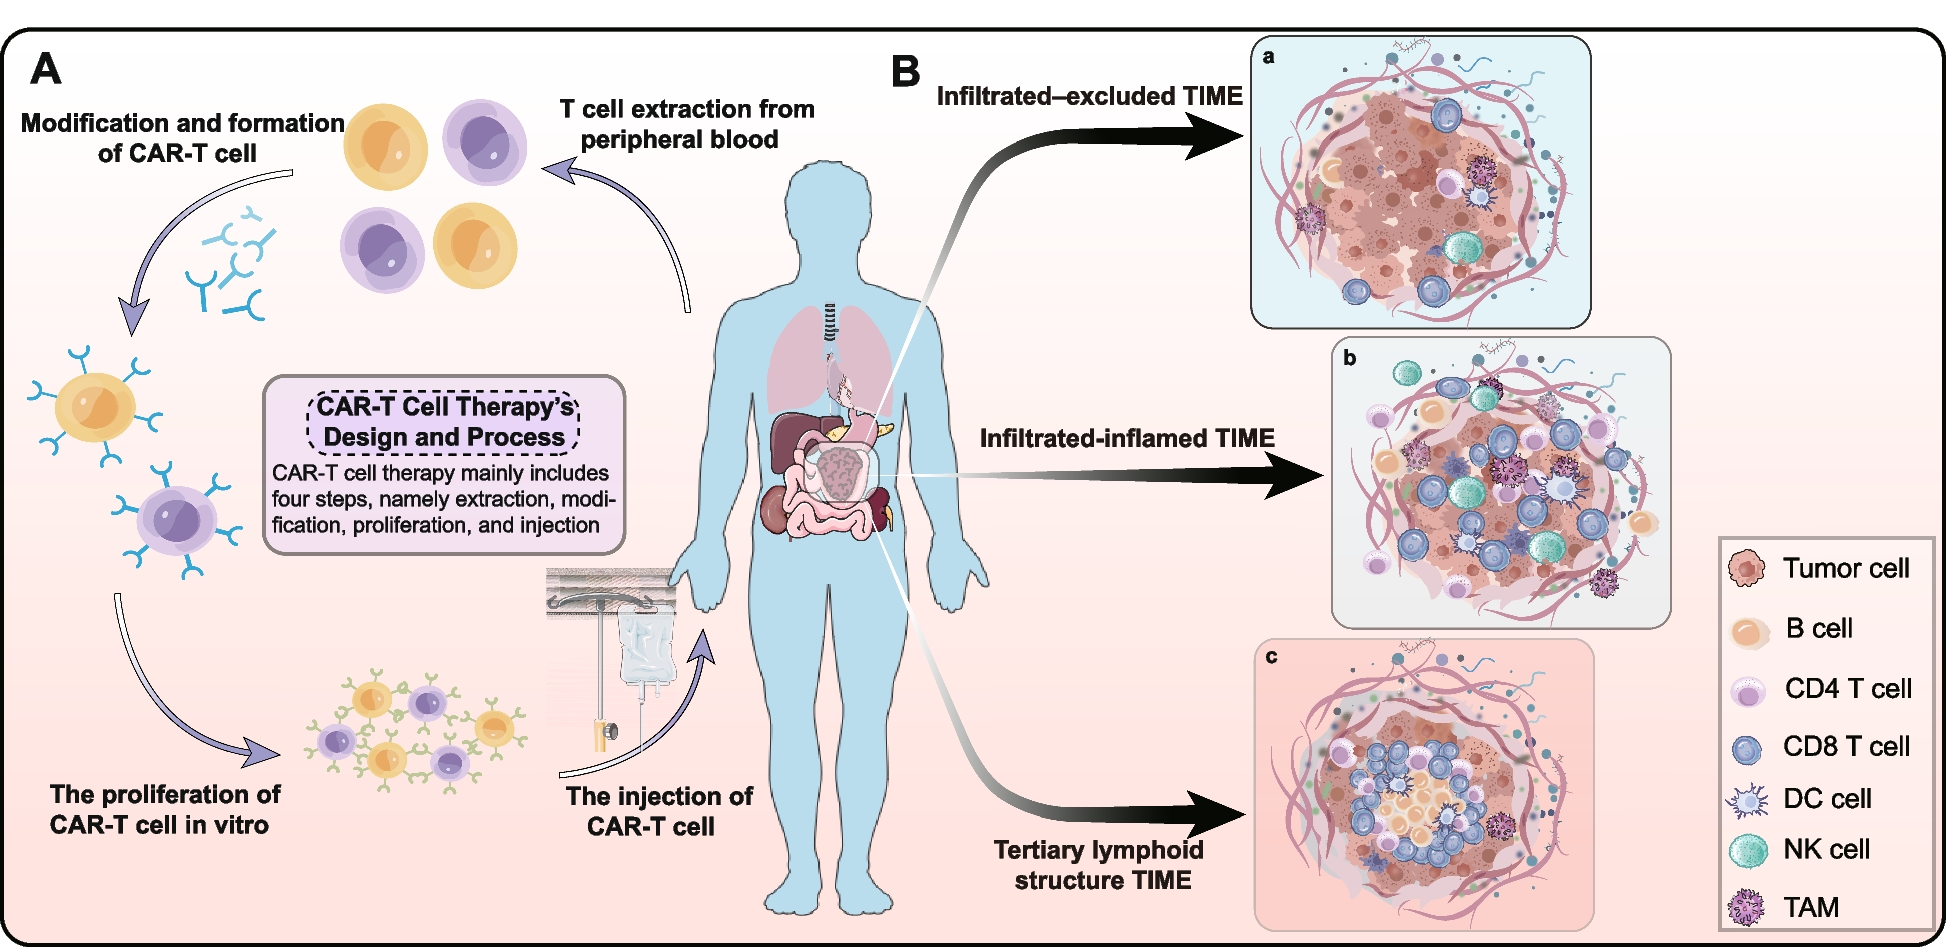 Deciphering the tumor immune microenvironment from a multidimensional omics perspective: insight into next-generation CAR-T cell immunotherapy and beyond